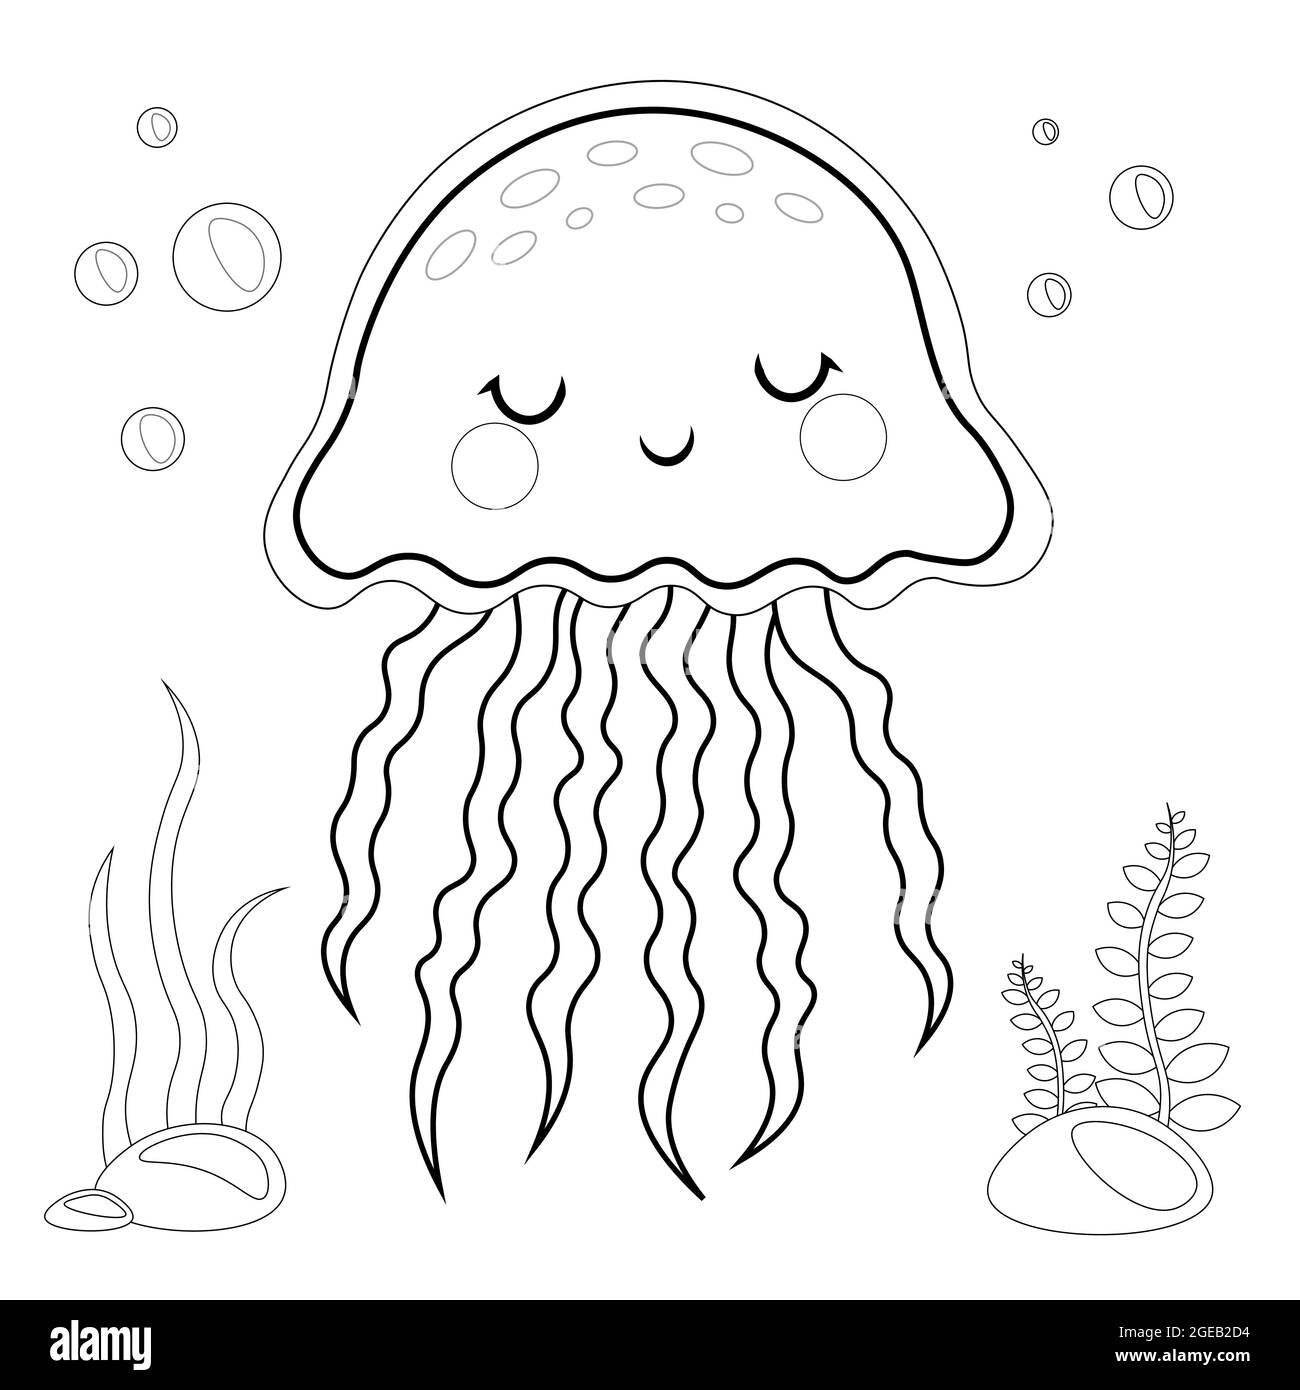 Illustration Featuring an Coloring. Cute Jellyfish Coloring Page ...